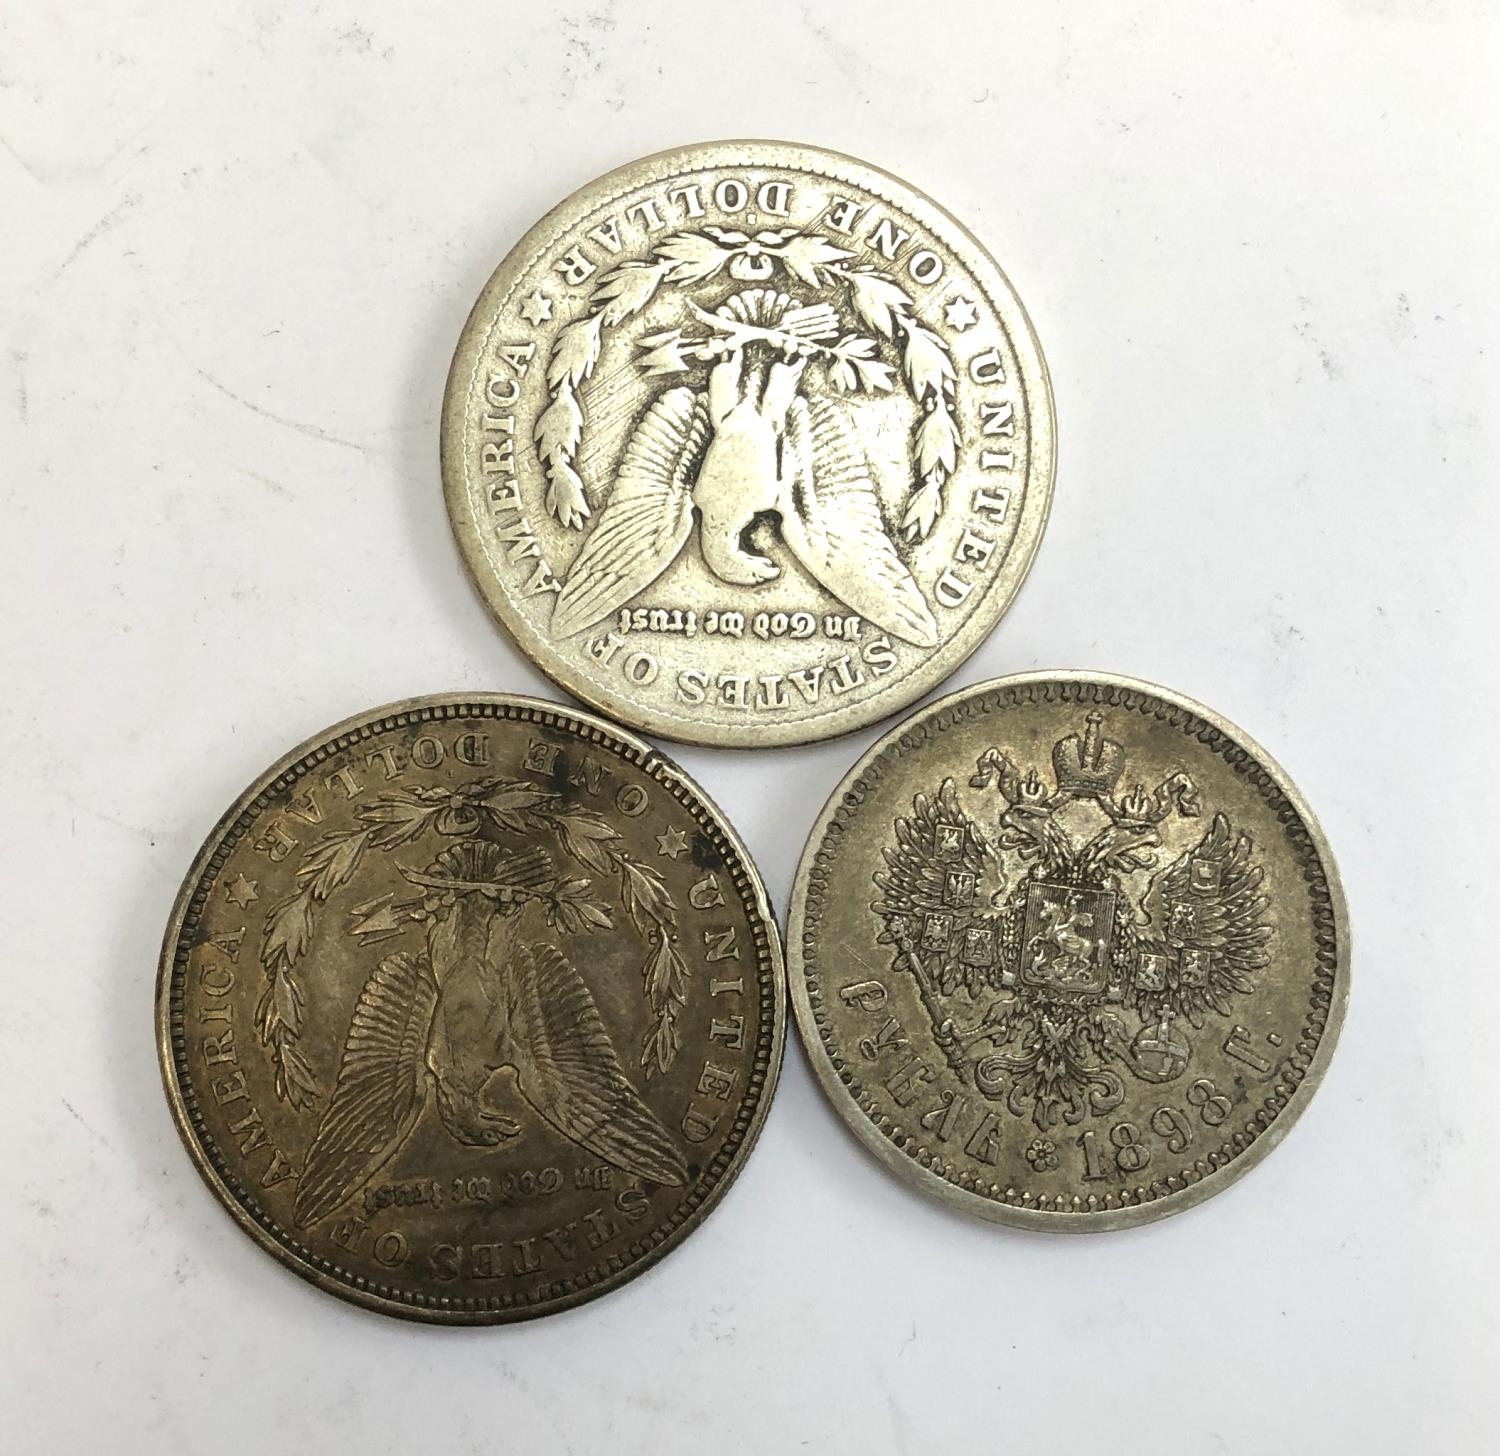 Two United States of America one dollar coins, 1921, together with 1 Rouble, Russia, 1898 - Image 2 of 2